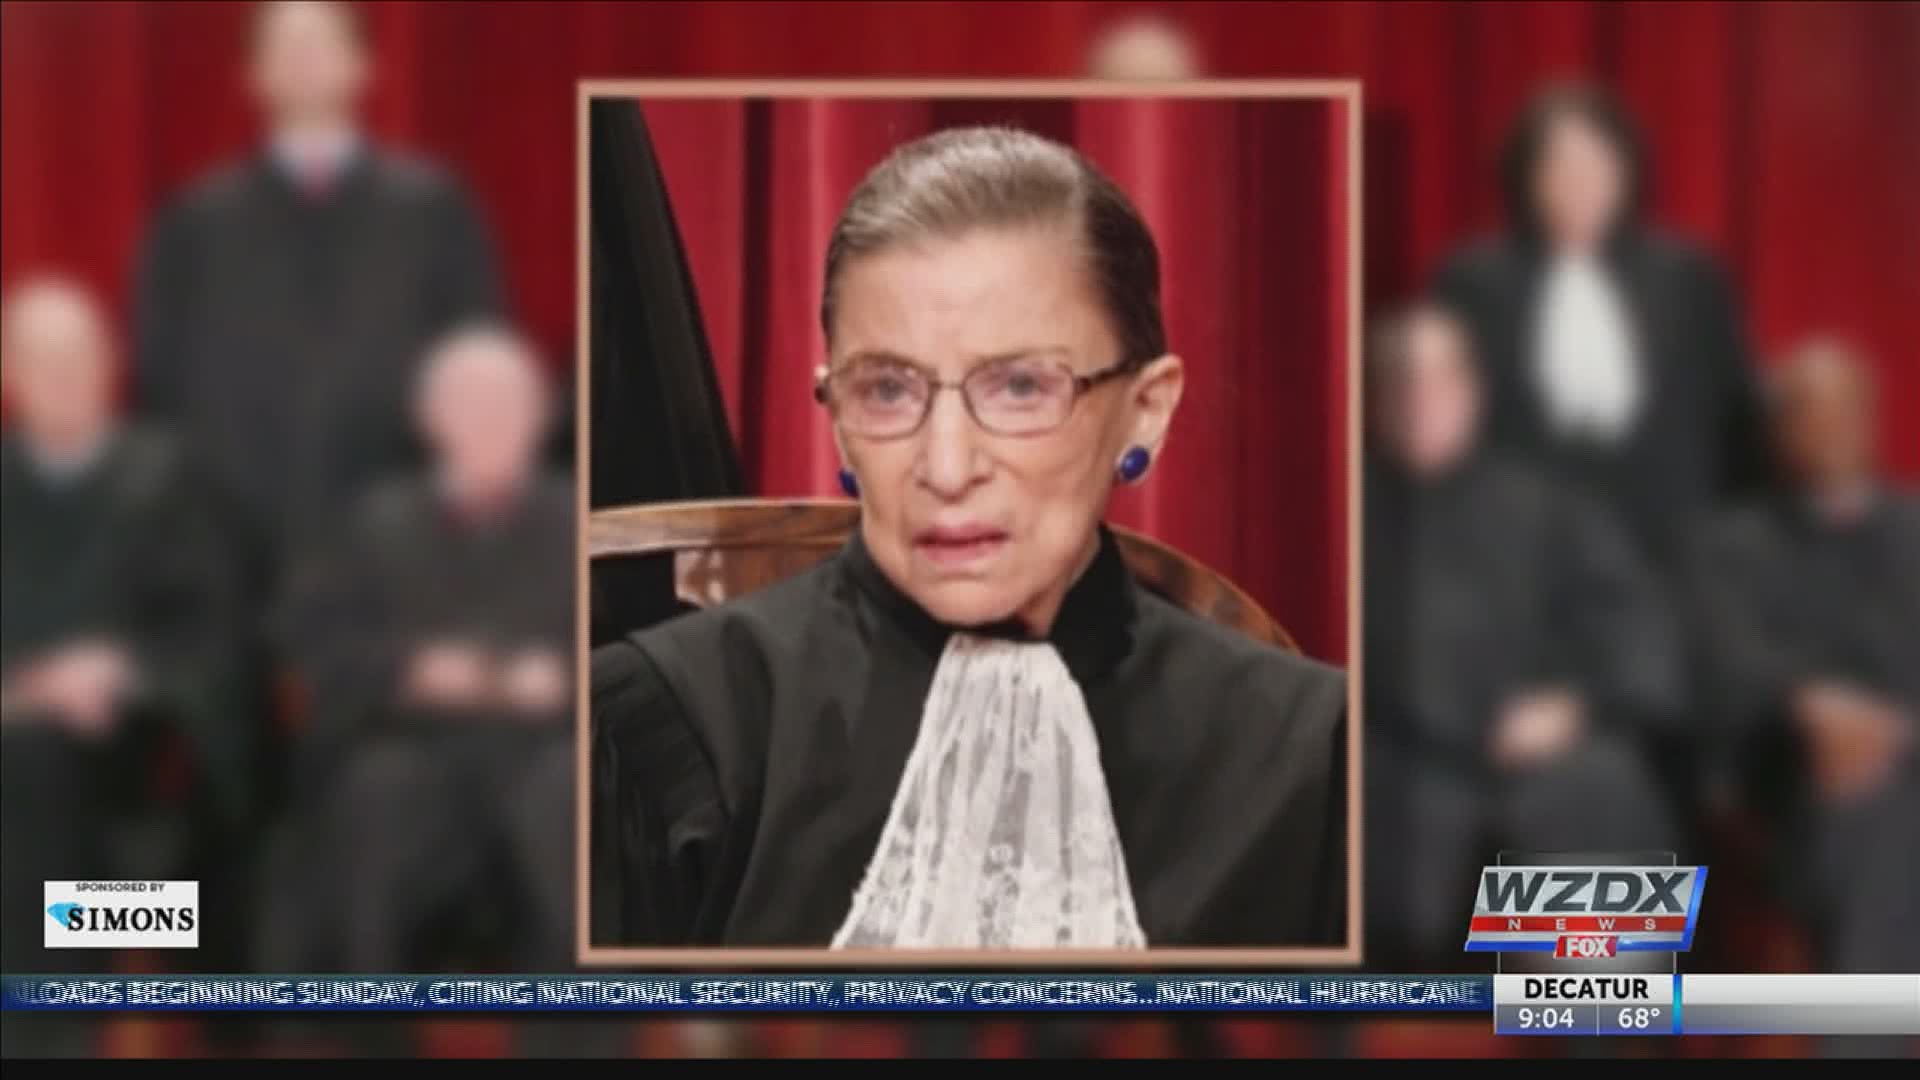 Justice Ruth Bader Ginsburg has died of metastatic pancreatic cancer at age 87, according to the U.S. Supreme Court.